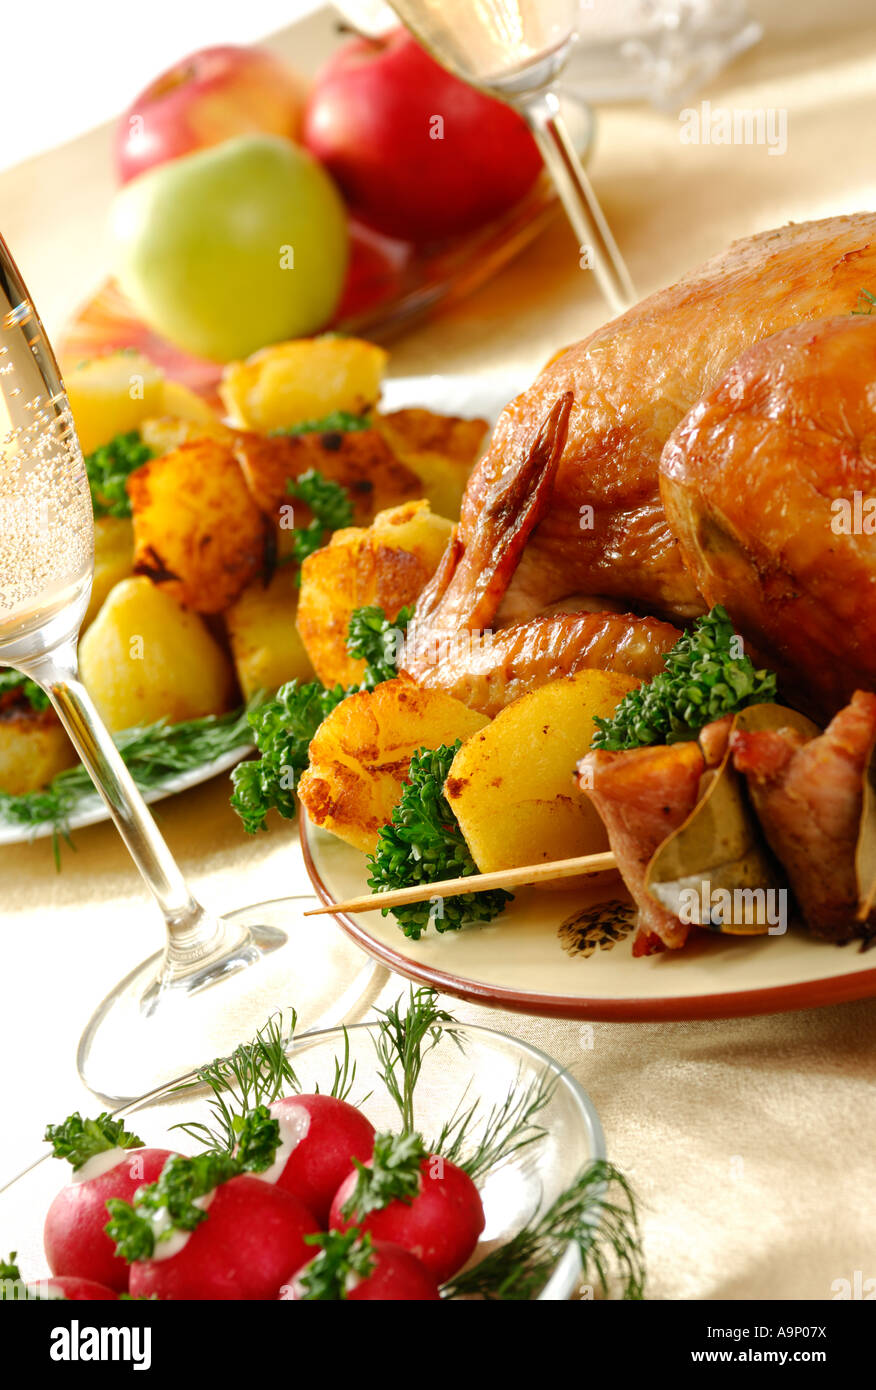 Festive food flavoured roast chicken and fried appetizing potatoes Holiday dinner meal celebration turkey Stock Photo